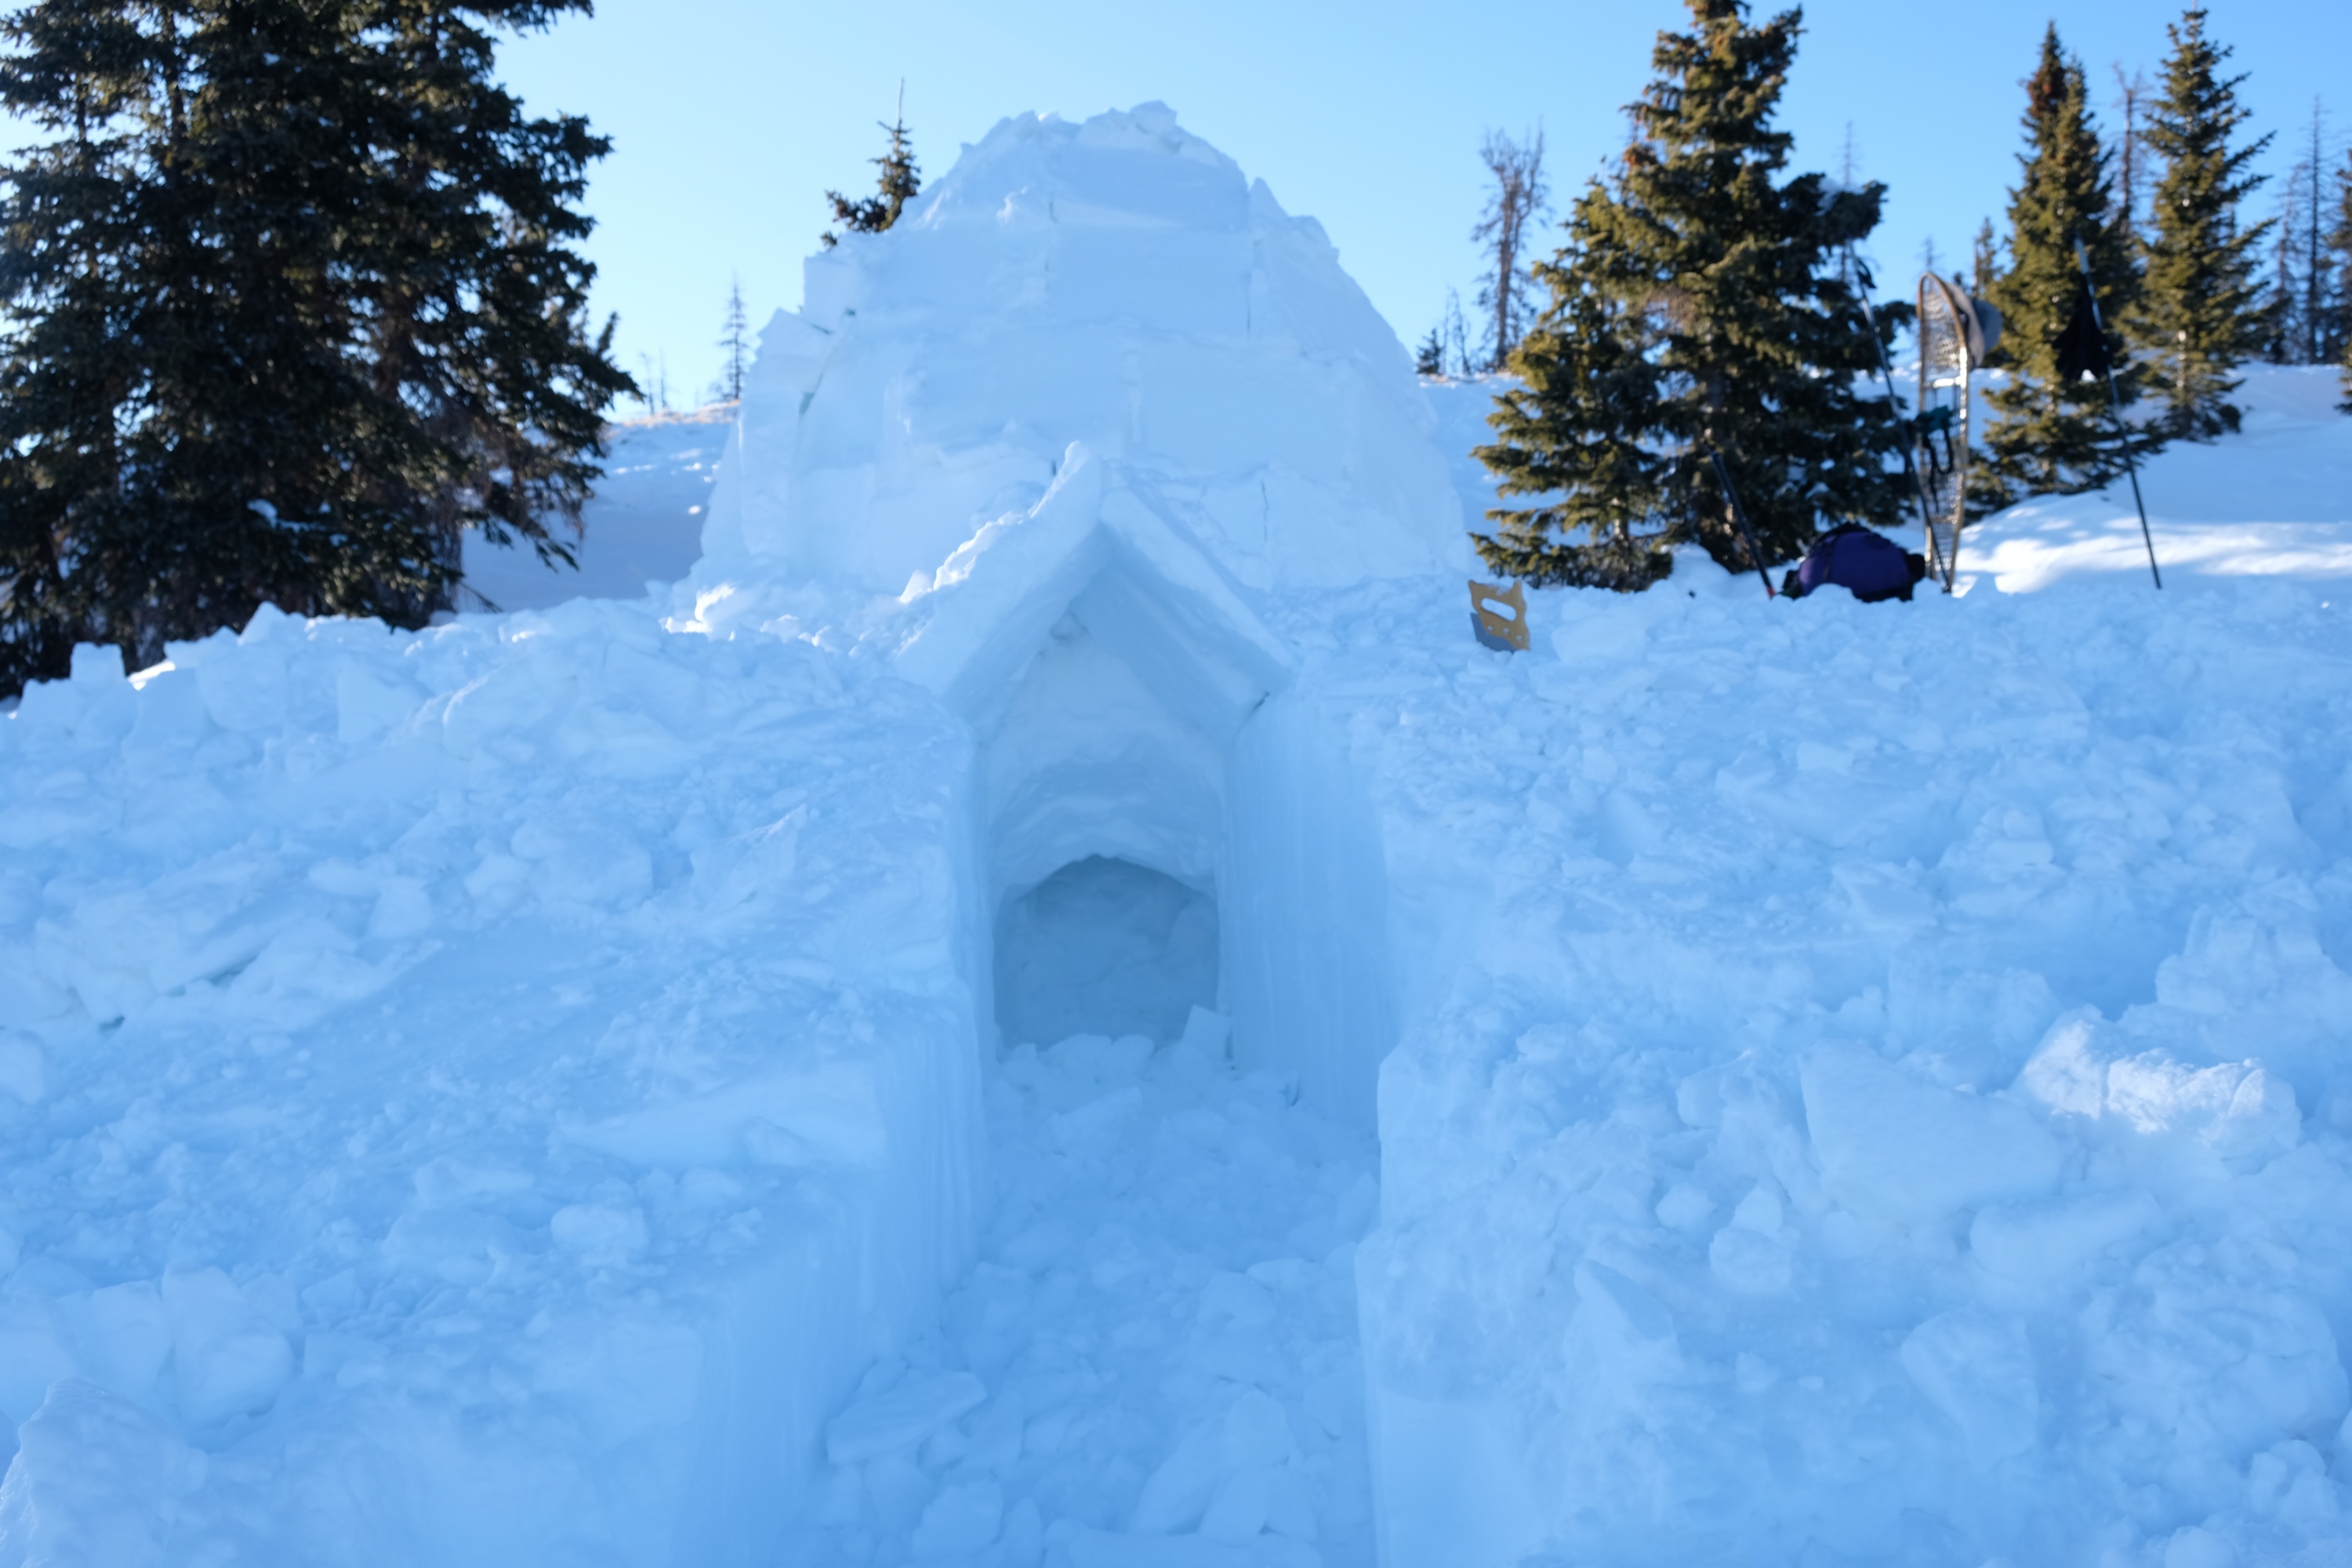 The igloo built during the Monarch Pass trip.